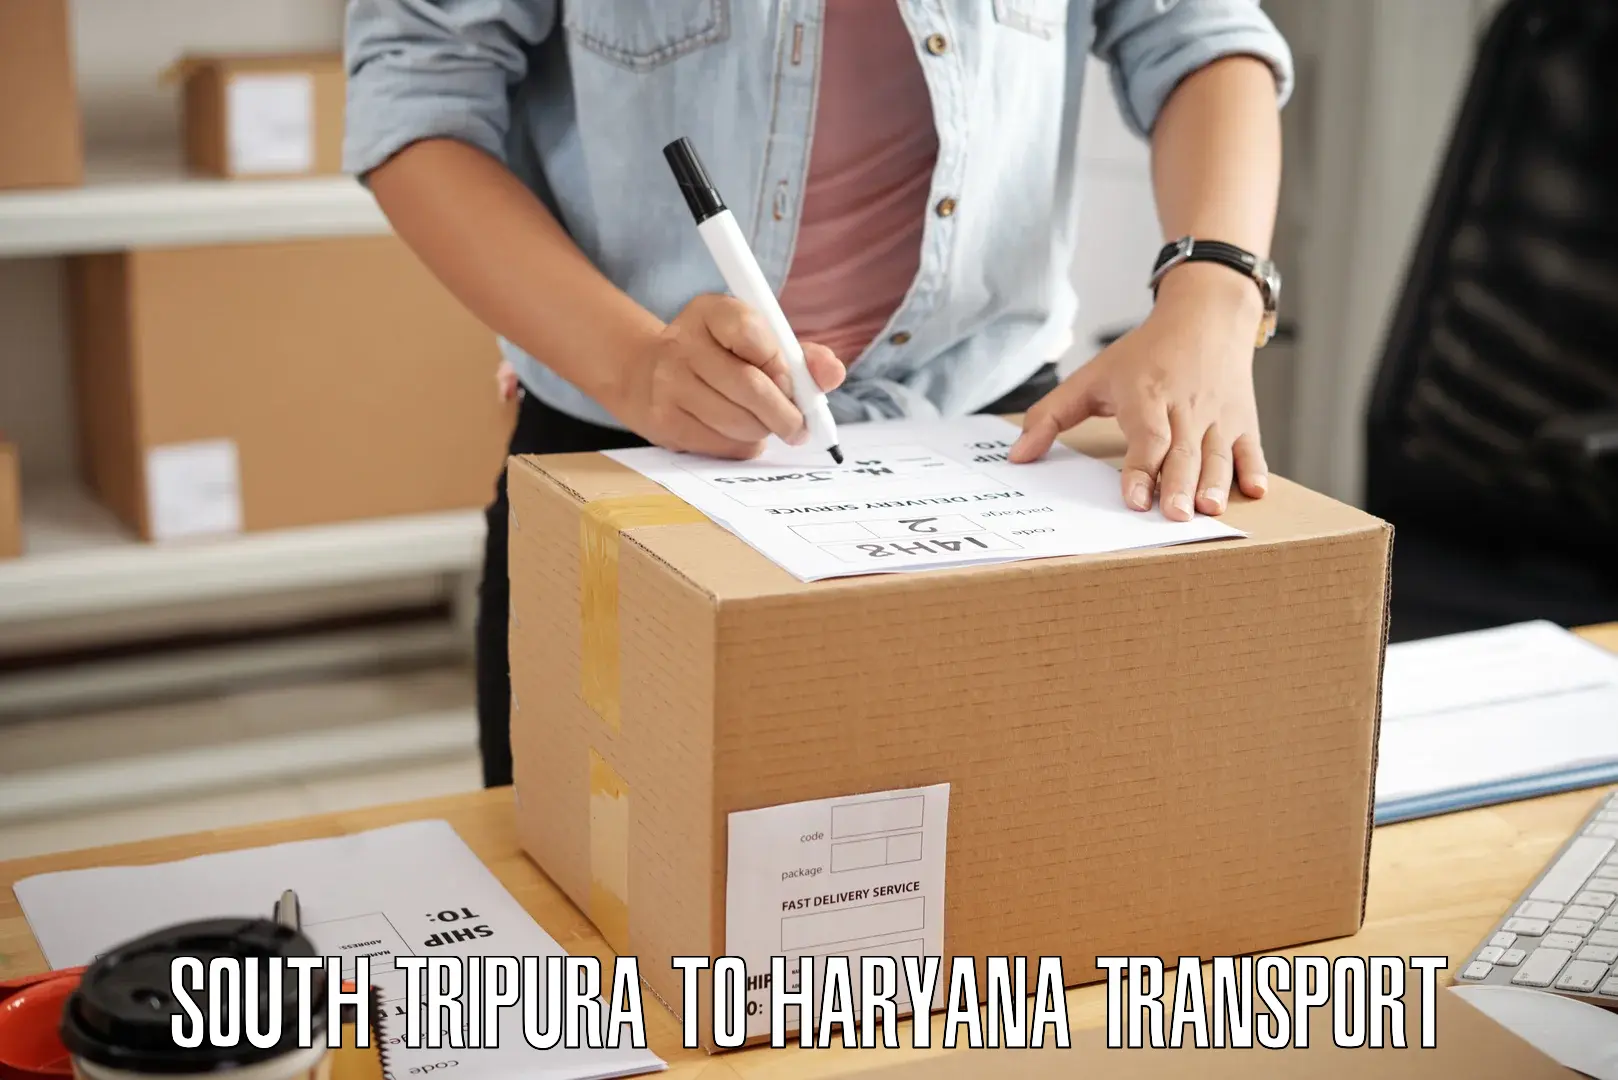 Express transport services South Tripura to IIIT Sonepat